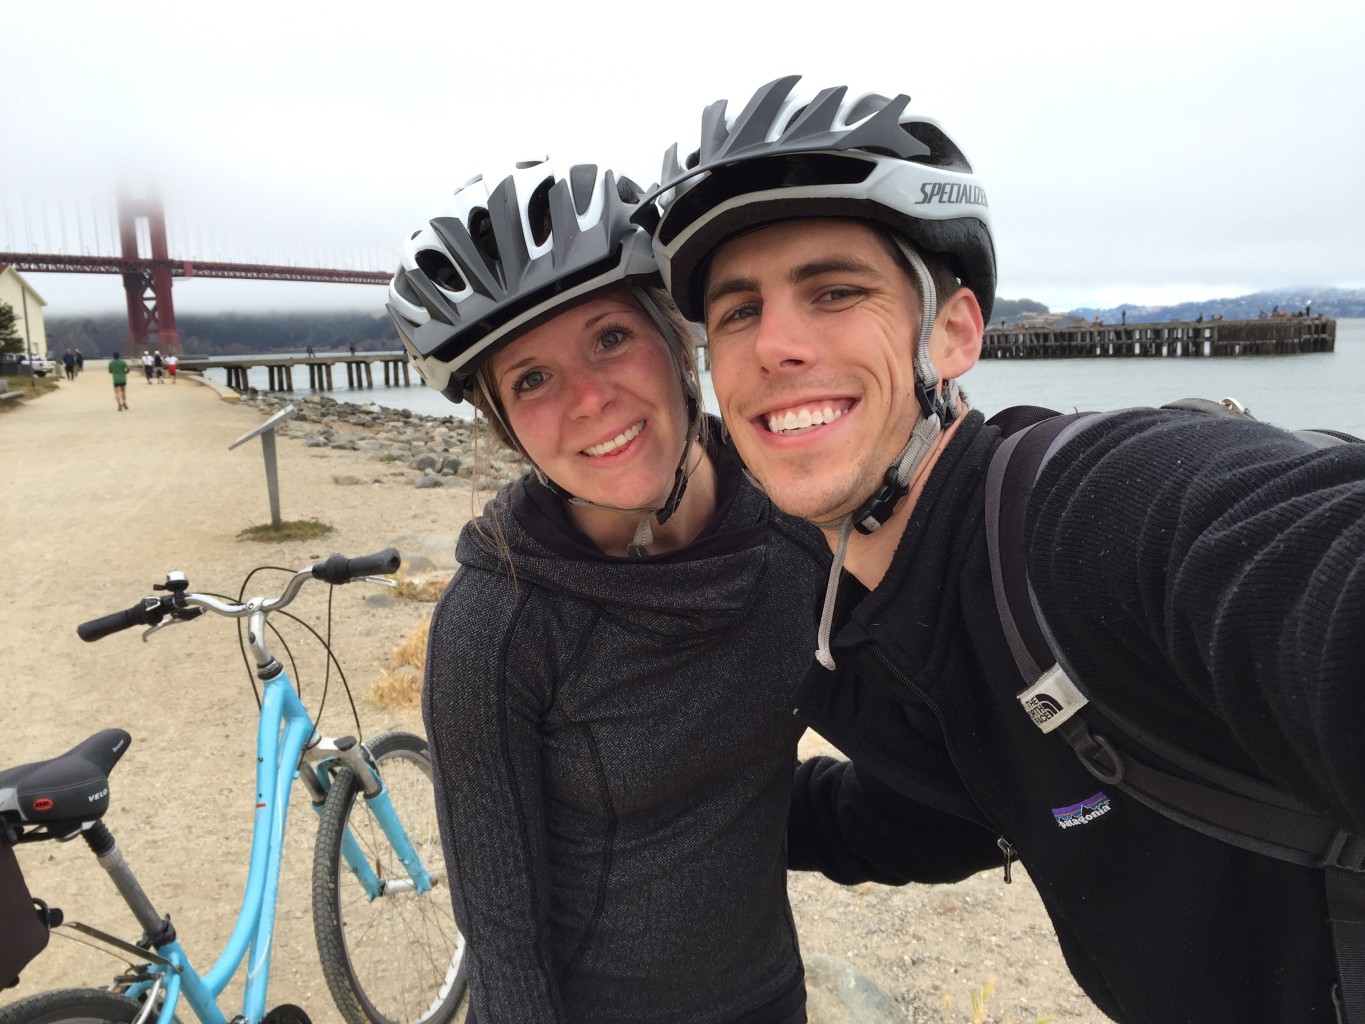 We rode bikes across the Golden Gate bridge. This is a photo from Torpedo Wharf right before getting to the bridge.